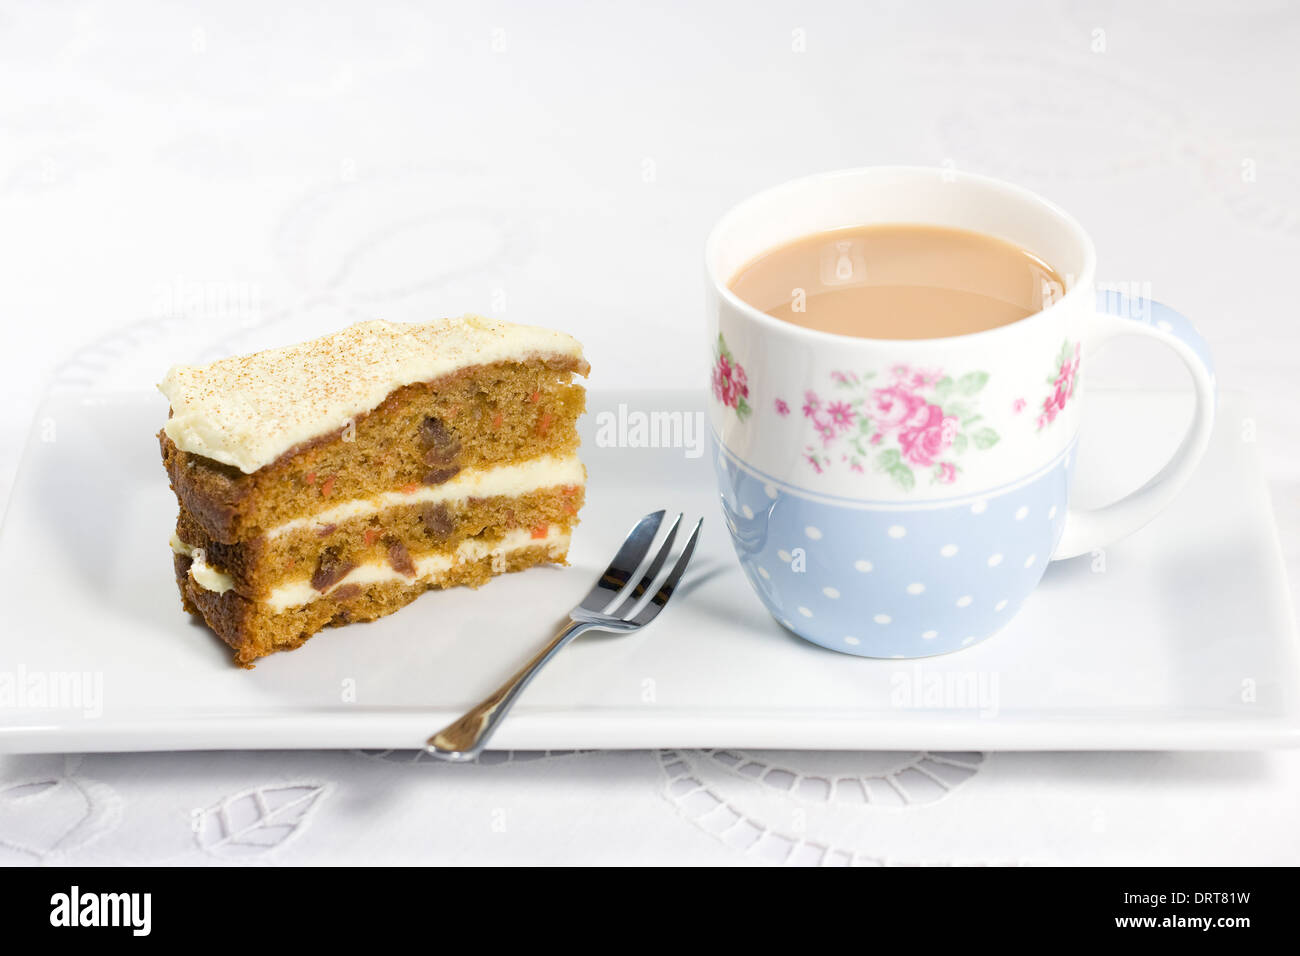 Cup of tea and homemade carrot cake on a white serving plate. Stock Photo